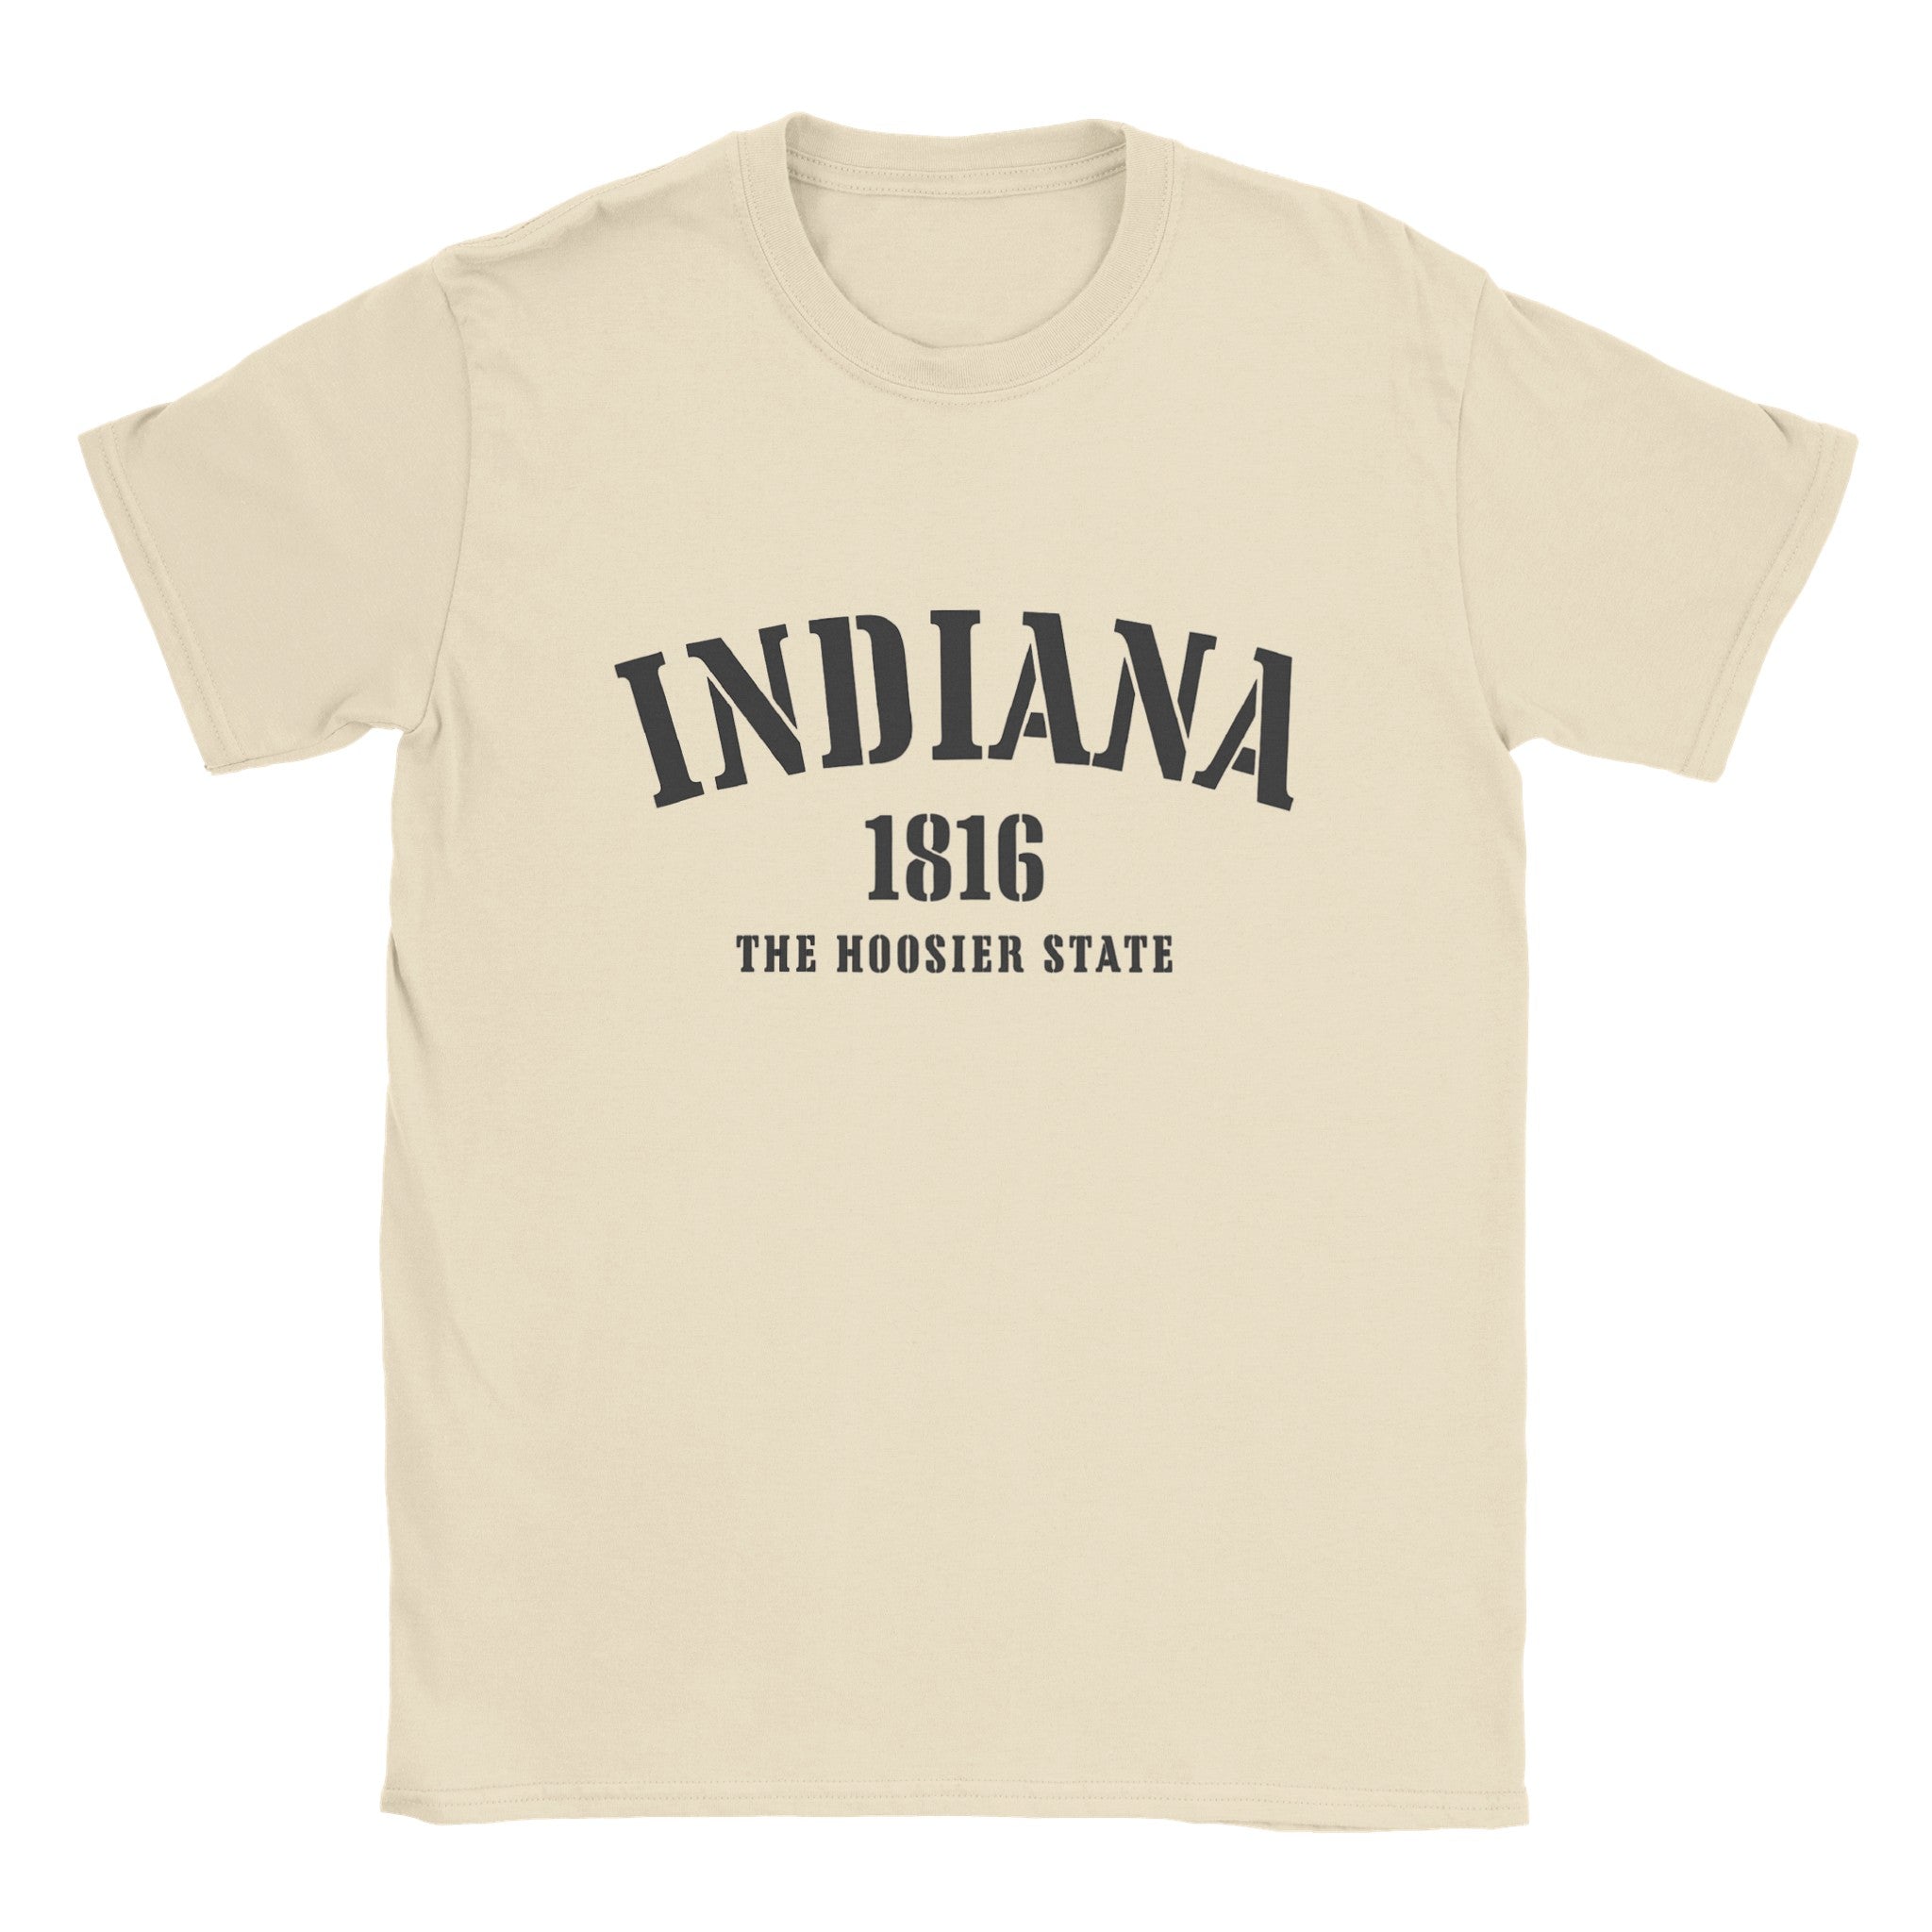 Indiana- Classic Unisex Crewneck States T-shirt - Creations by Chris and Carlos